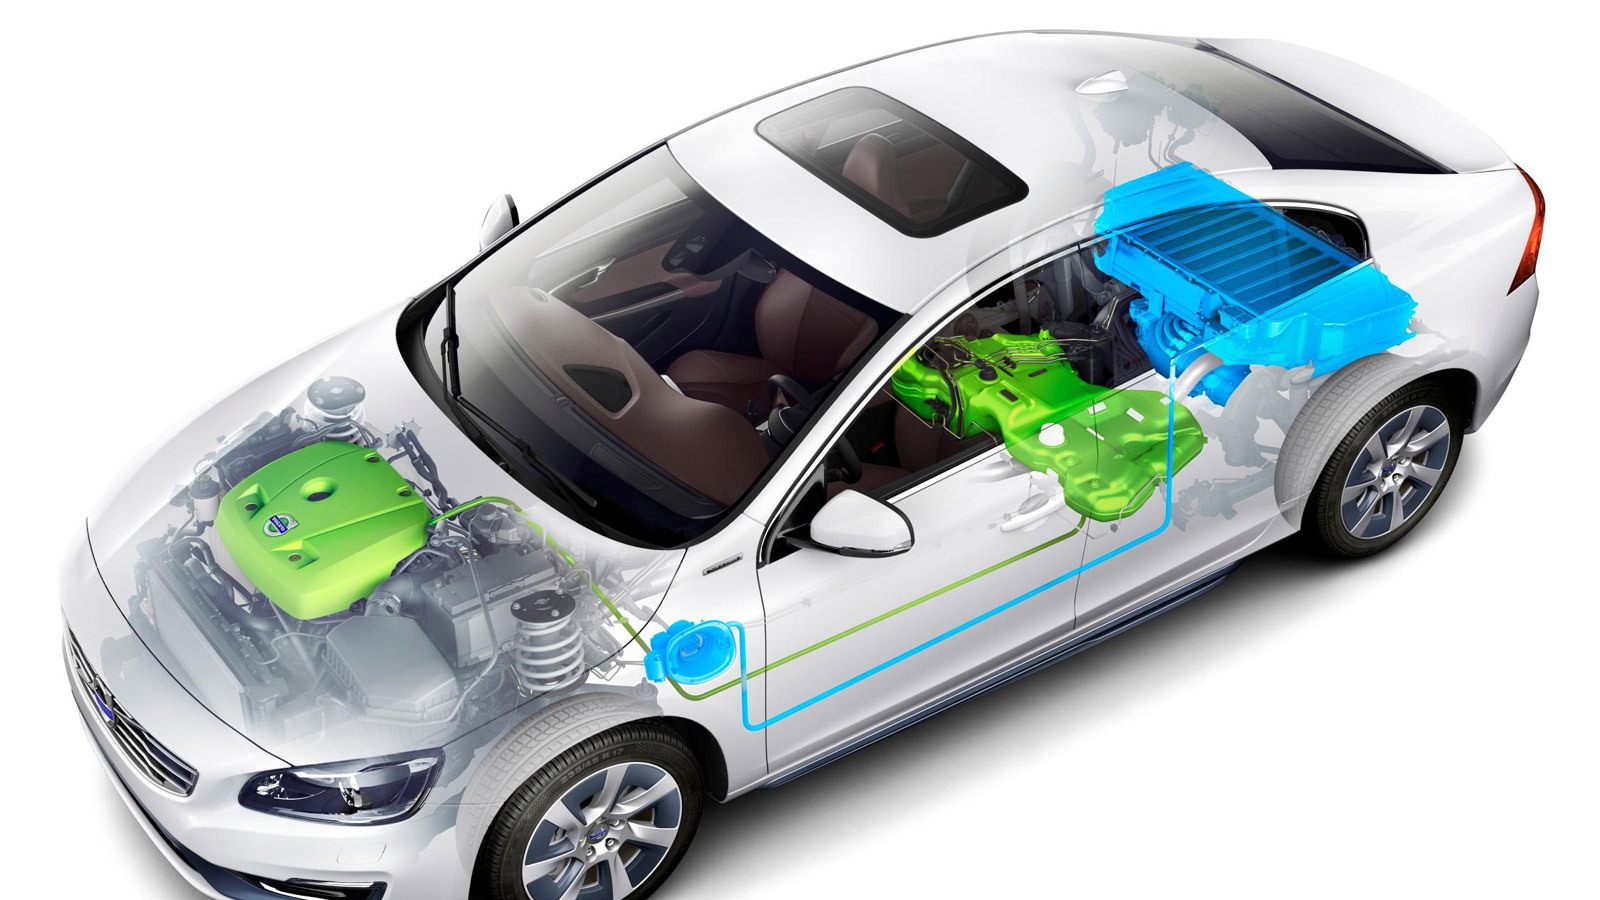 Volvo S60L Petrol Plug-in Hybrid Electric Vehicle concept, 2014 Beijing Auto Show